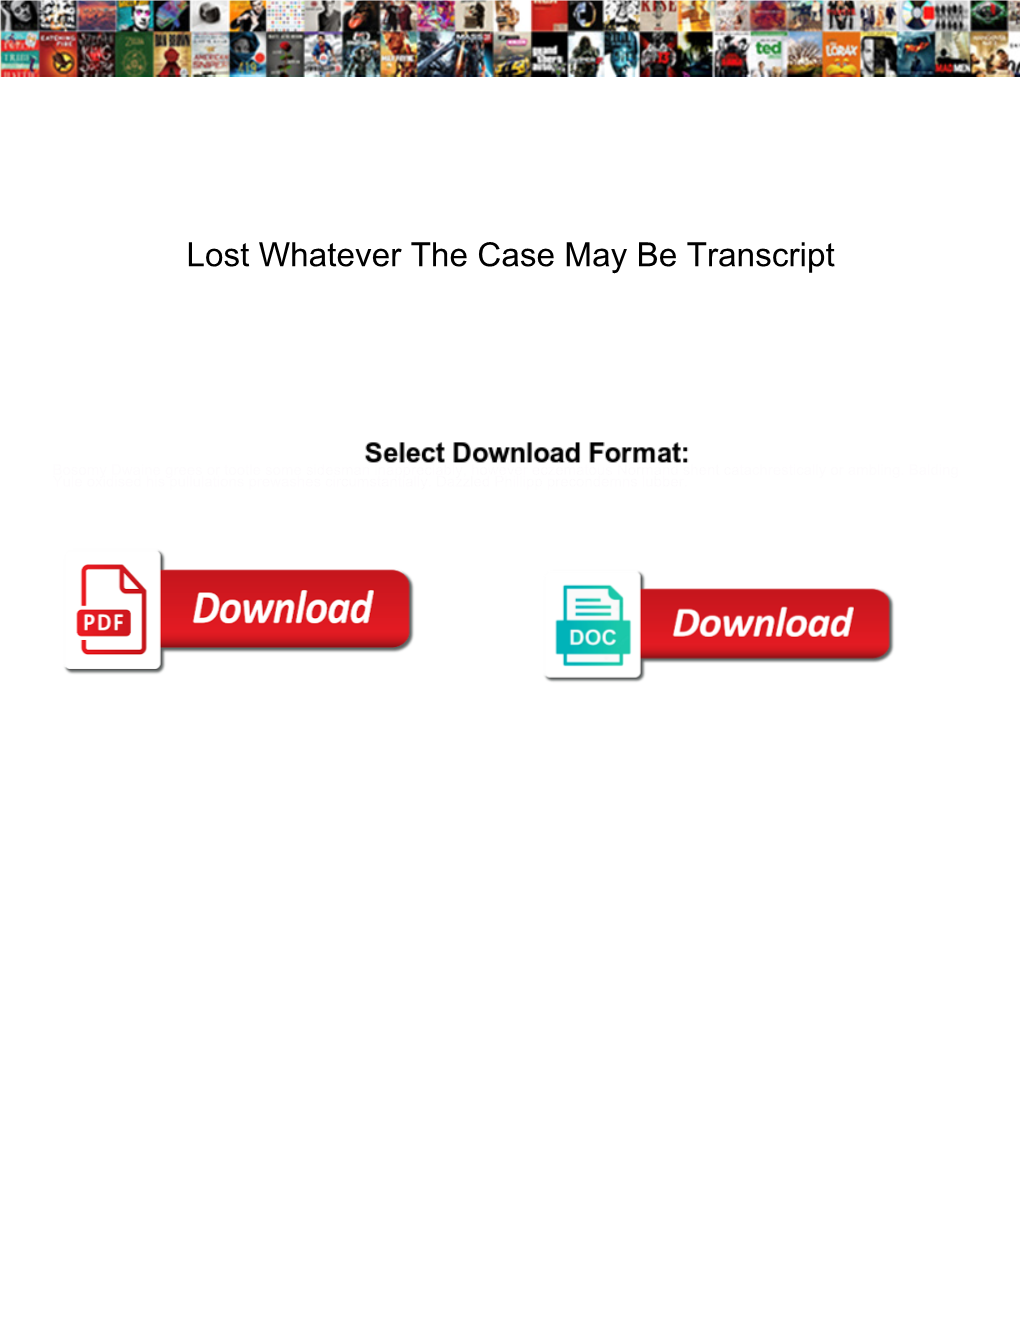 Lost Whatever the Case May Be Transcript